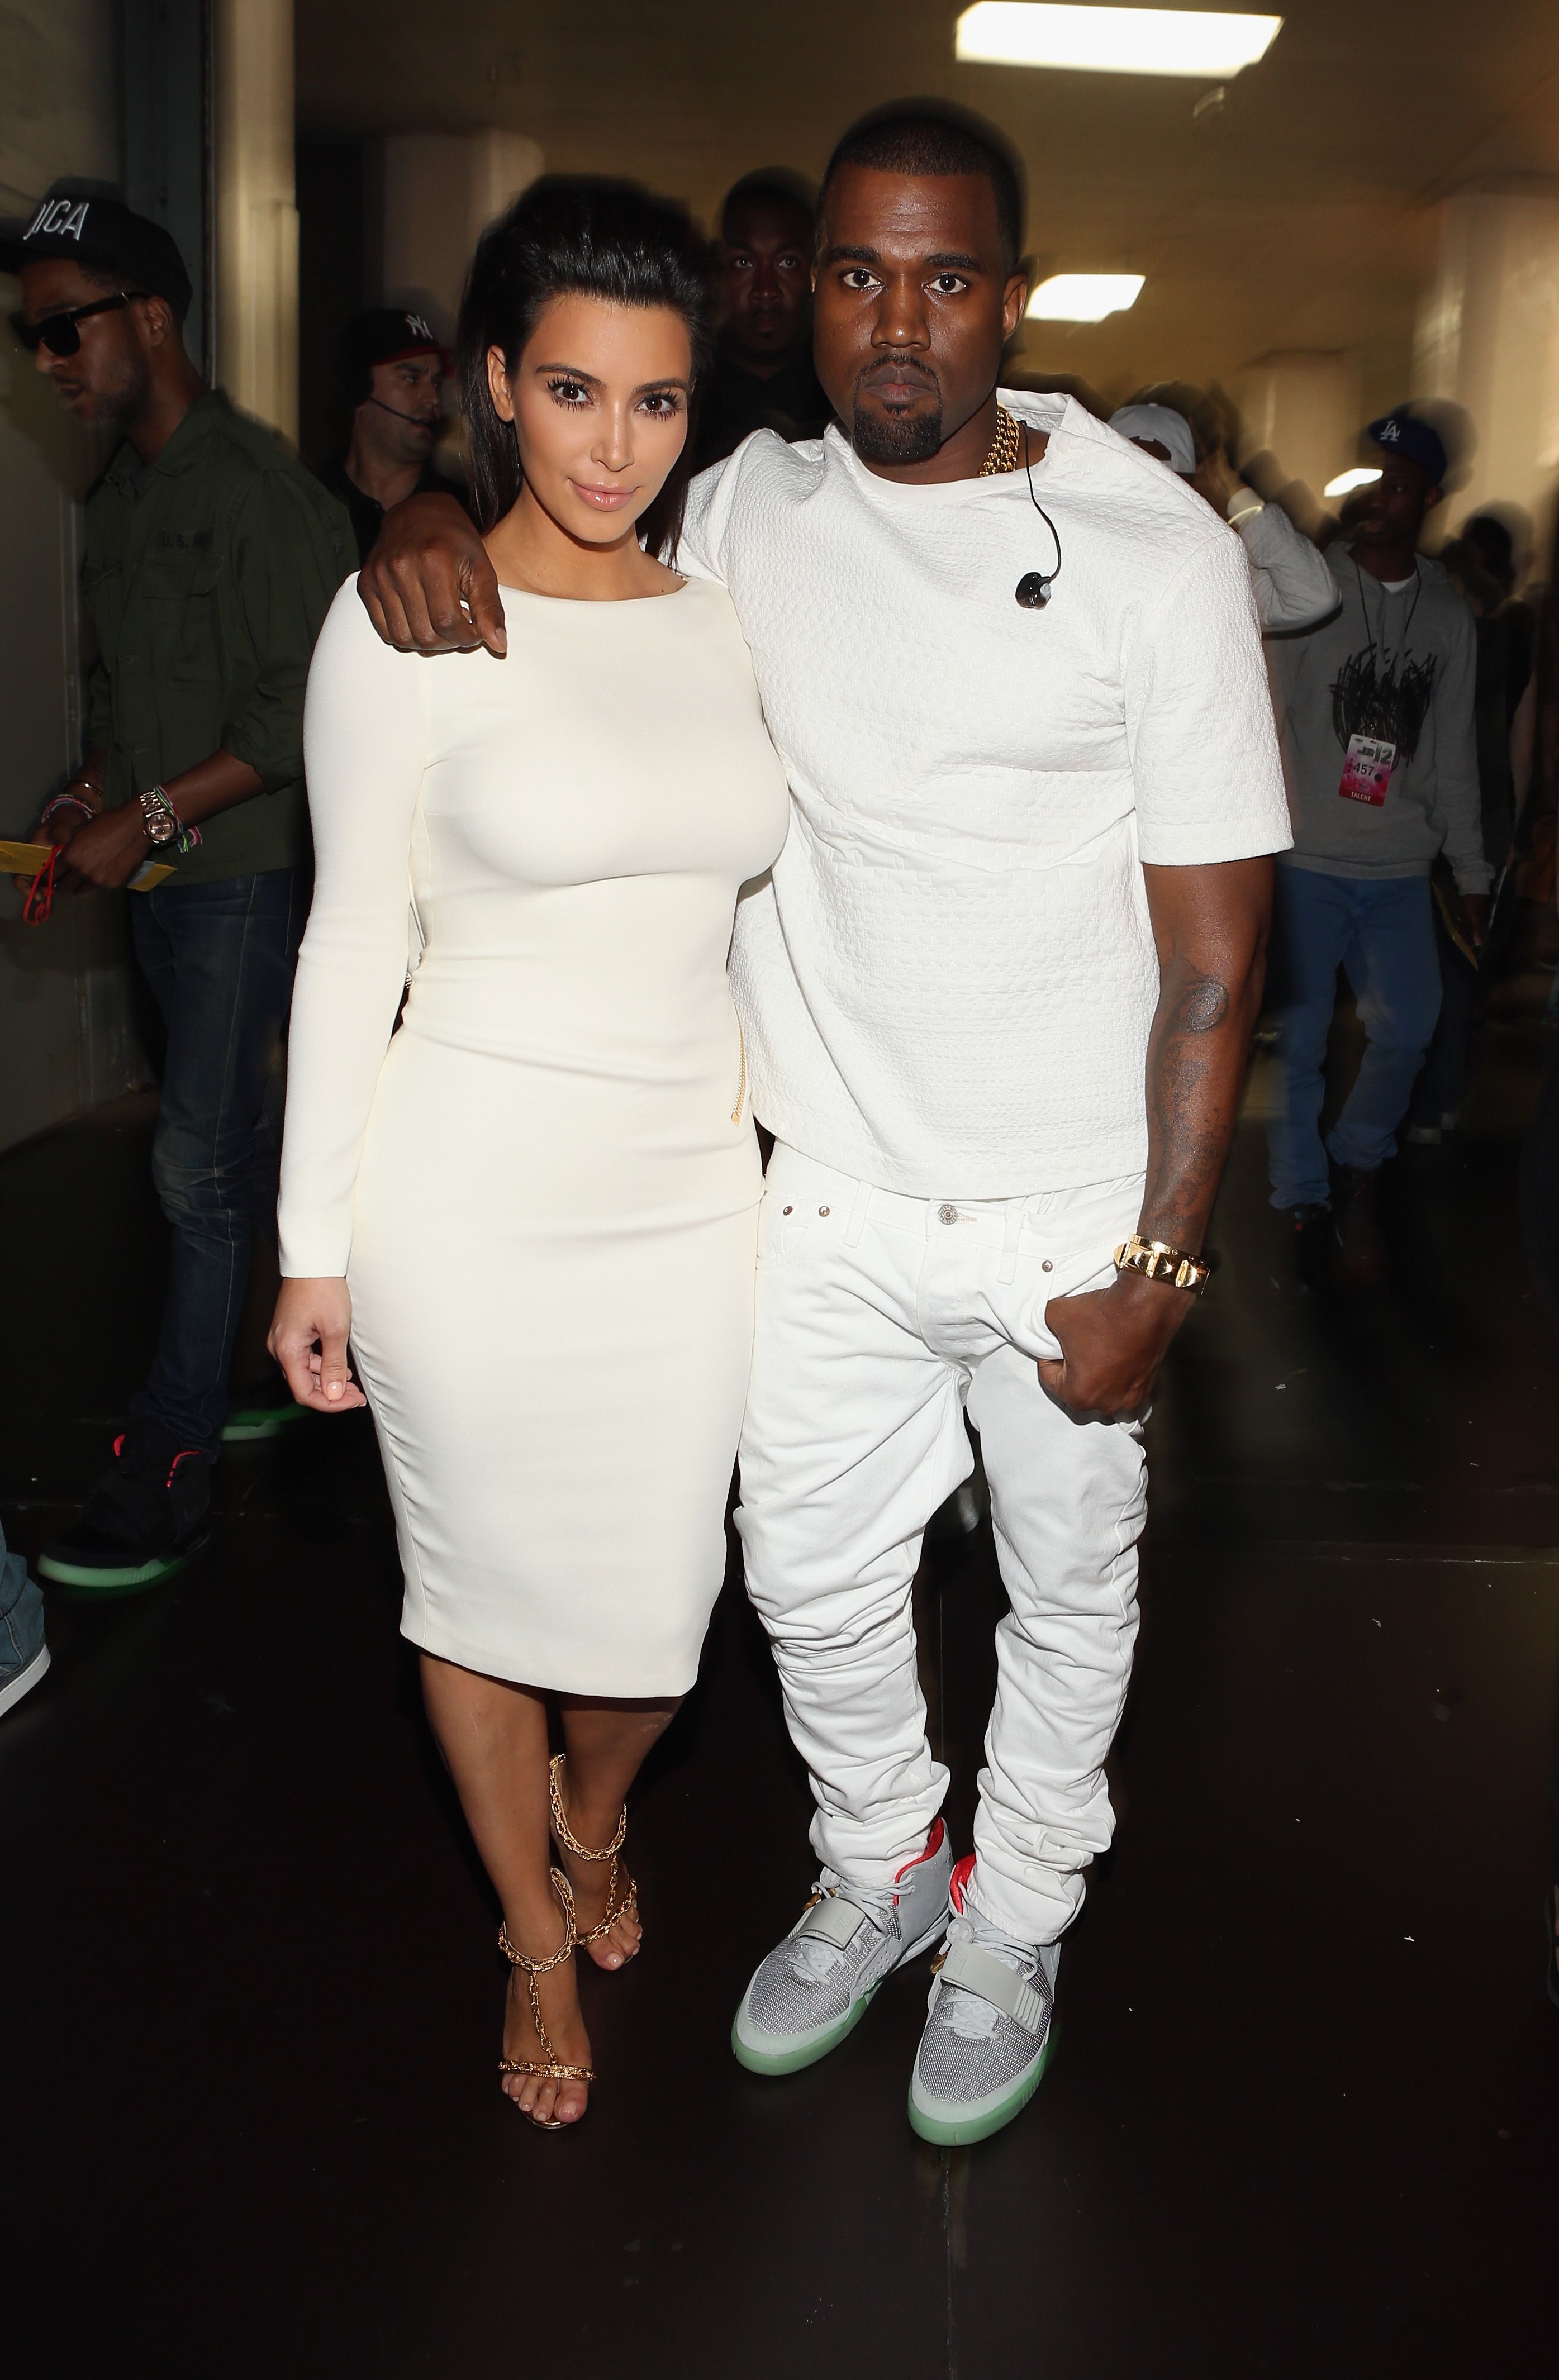 Kim Kardashian and Kanye West at the BET Awards held at The Shrine Auditorium on July 1, 2012, in Los Angeles, California | Photo: Christopher Polk/Getty Images